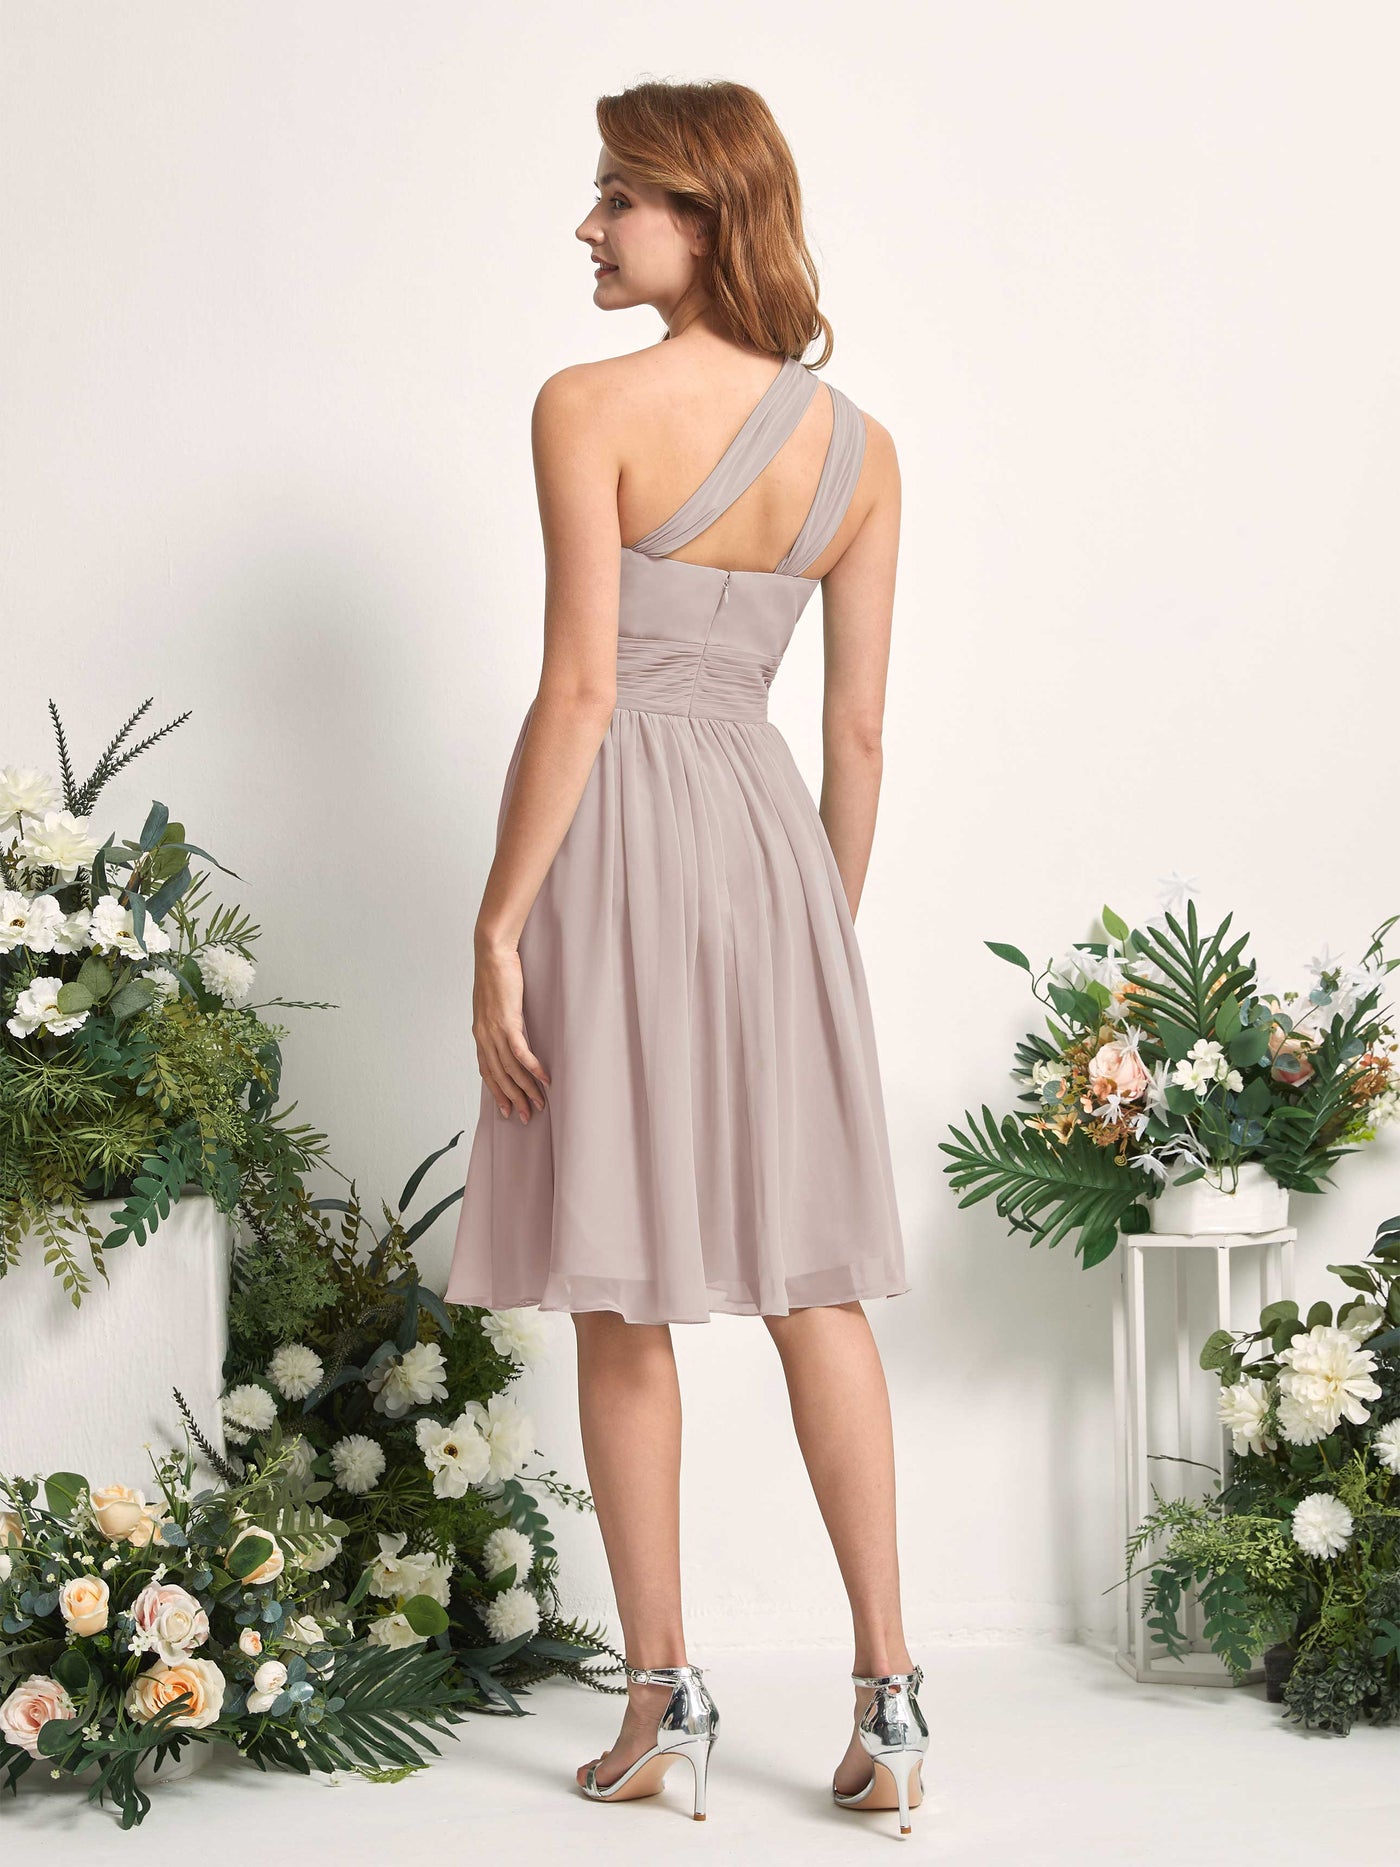 Bridesmaid Dress A-line Chiffon One Shoulder Knee Length Sleeveless Wedding Party Dress - Taupe (81221224)#color_taupe